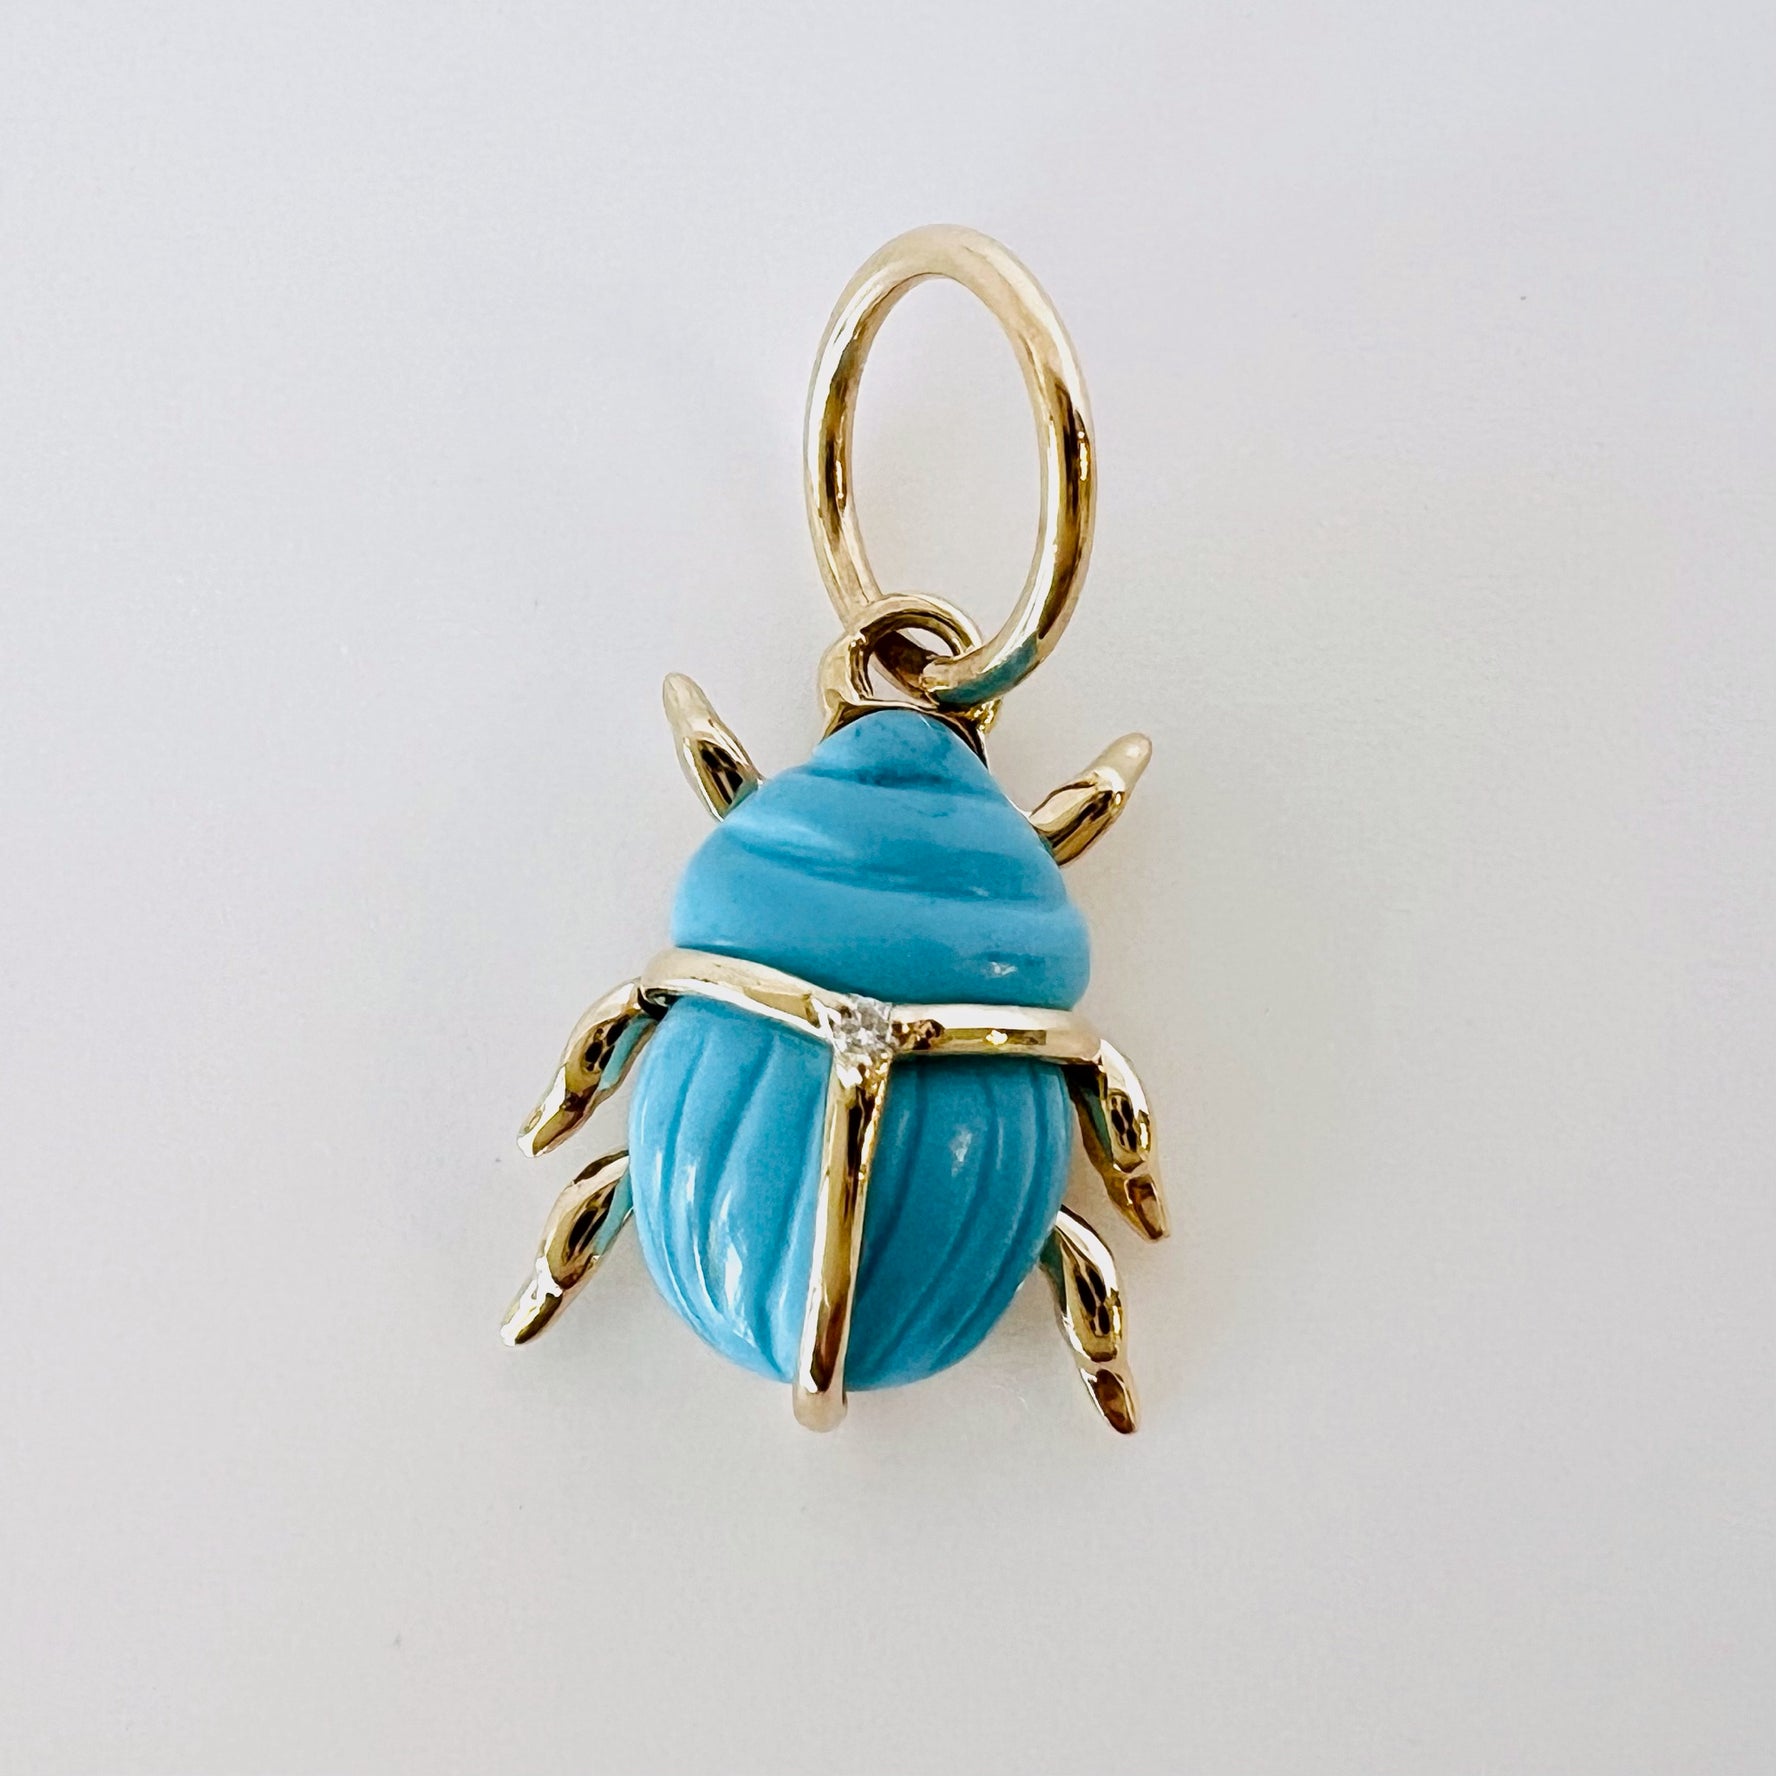 14k gold and turquoise bug pendant/charm